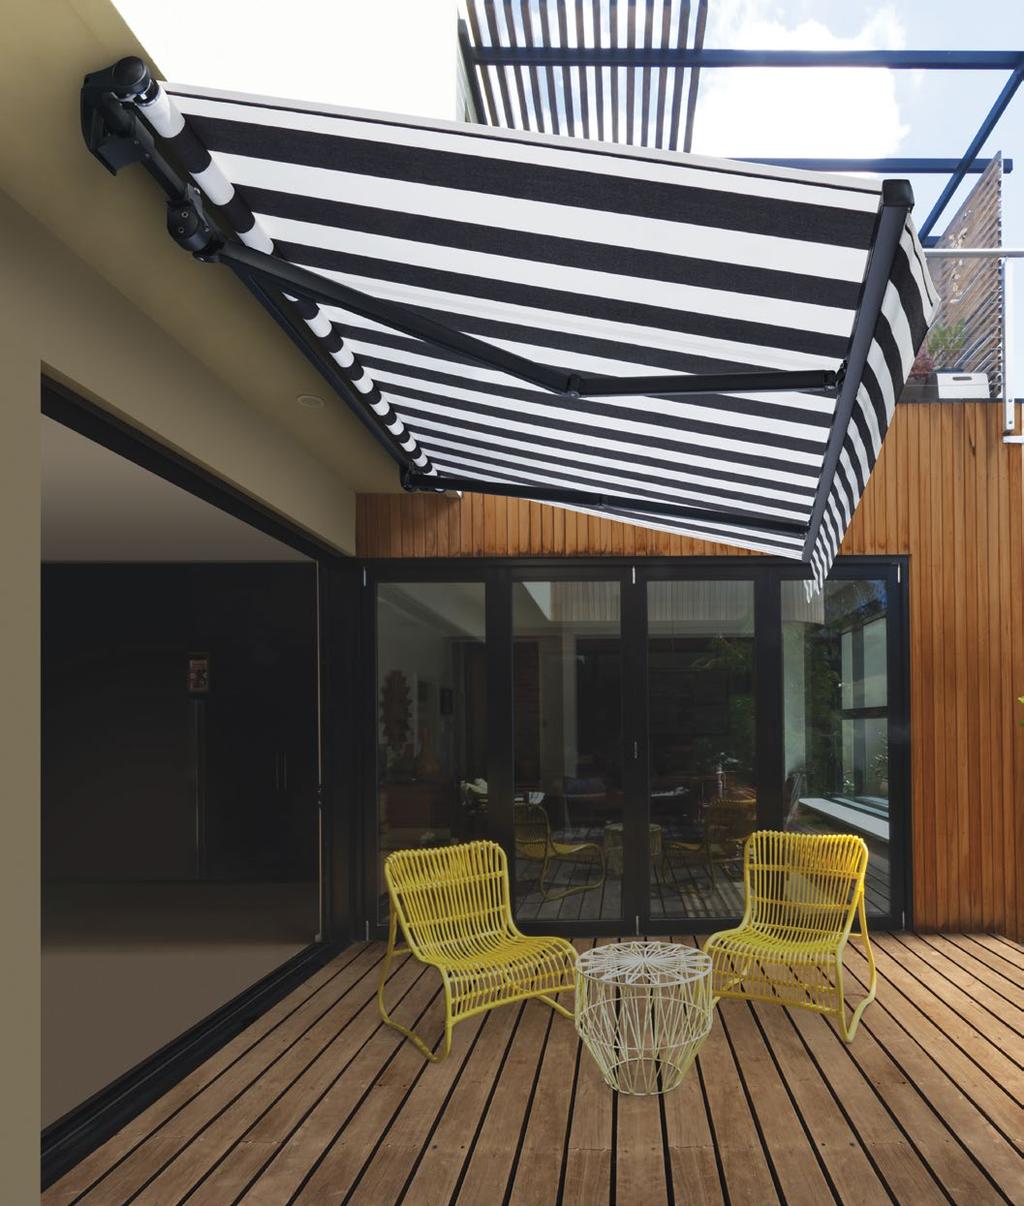 Selecting the right awning The Sunway Folding Arm Awning range features a variety of models that can be customised to suit your needs with a wide variety of sizes, operating options and functions.